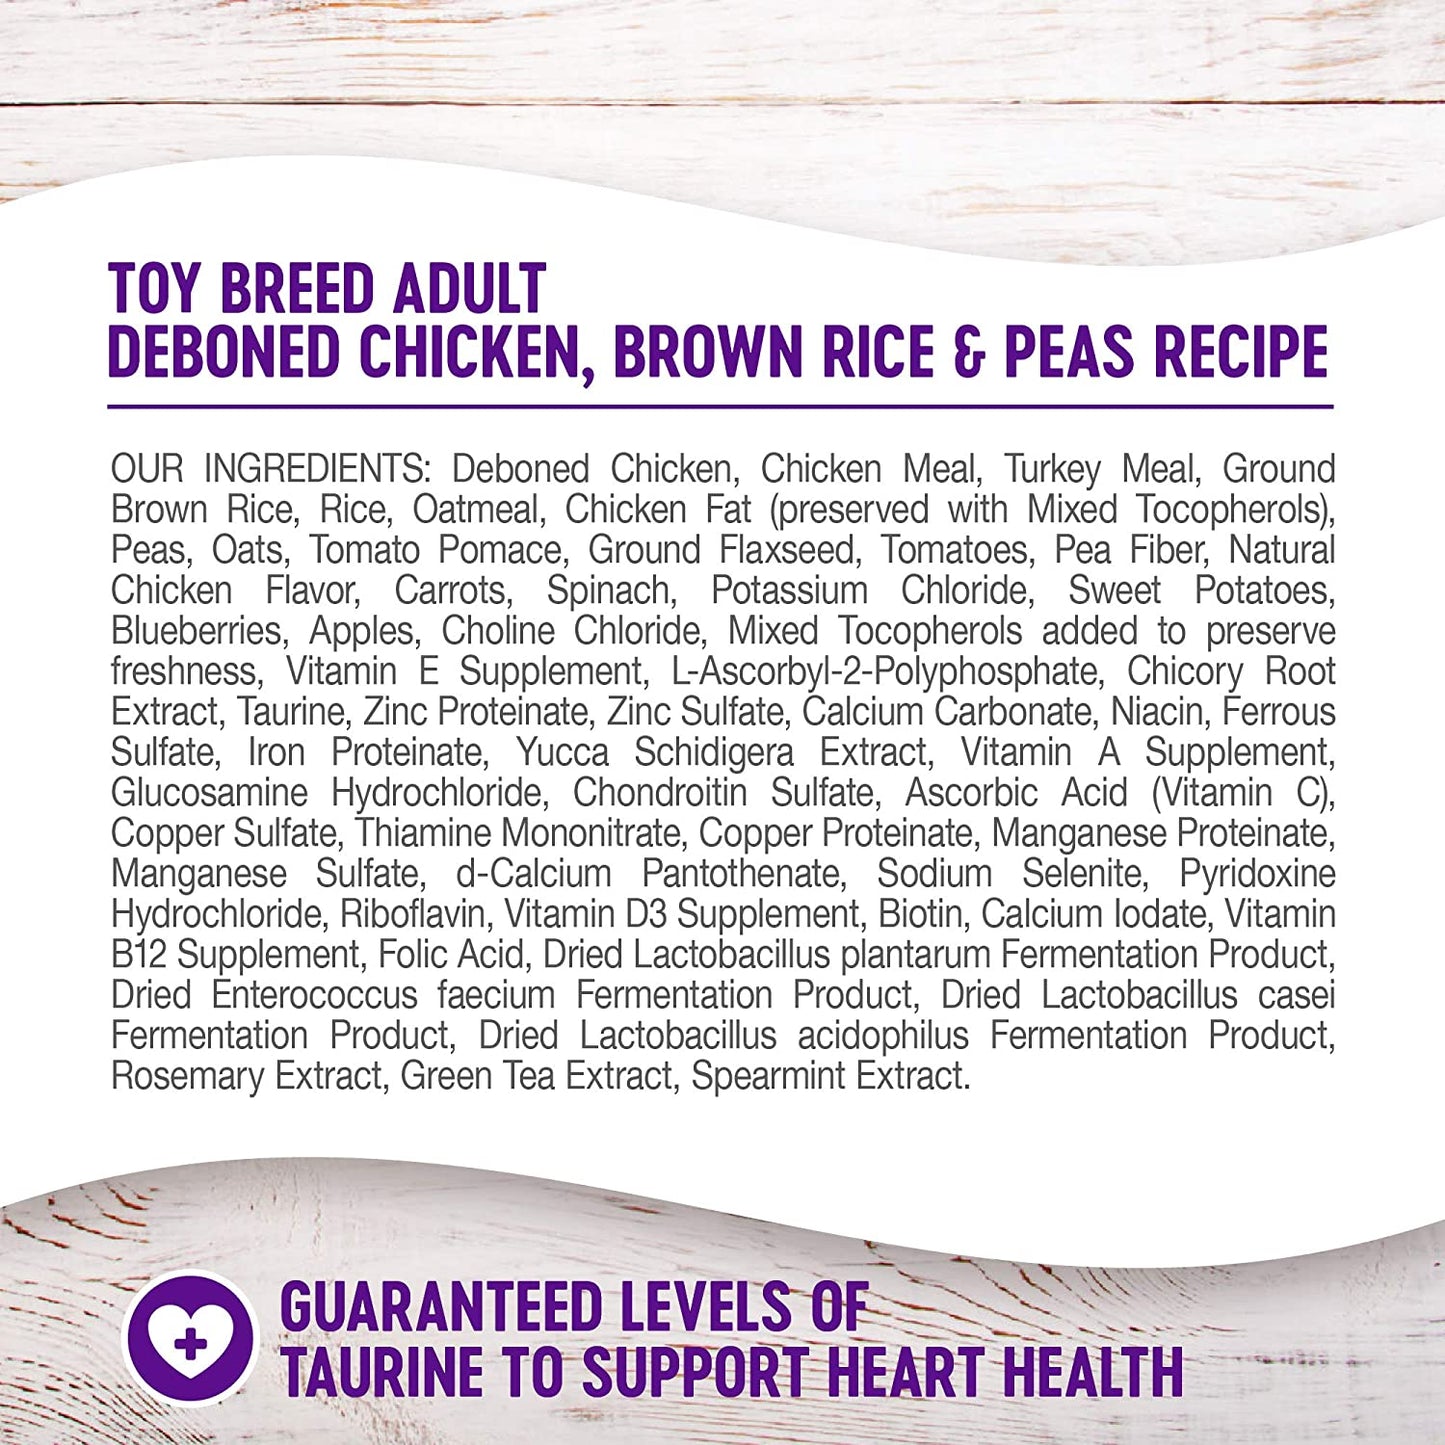 Wellness Complete Health Natural Dry Small Breed Dog Food Toy Breed Chicken & Rice